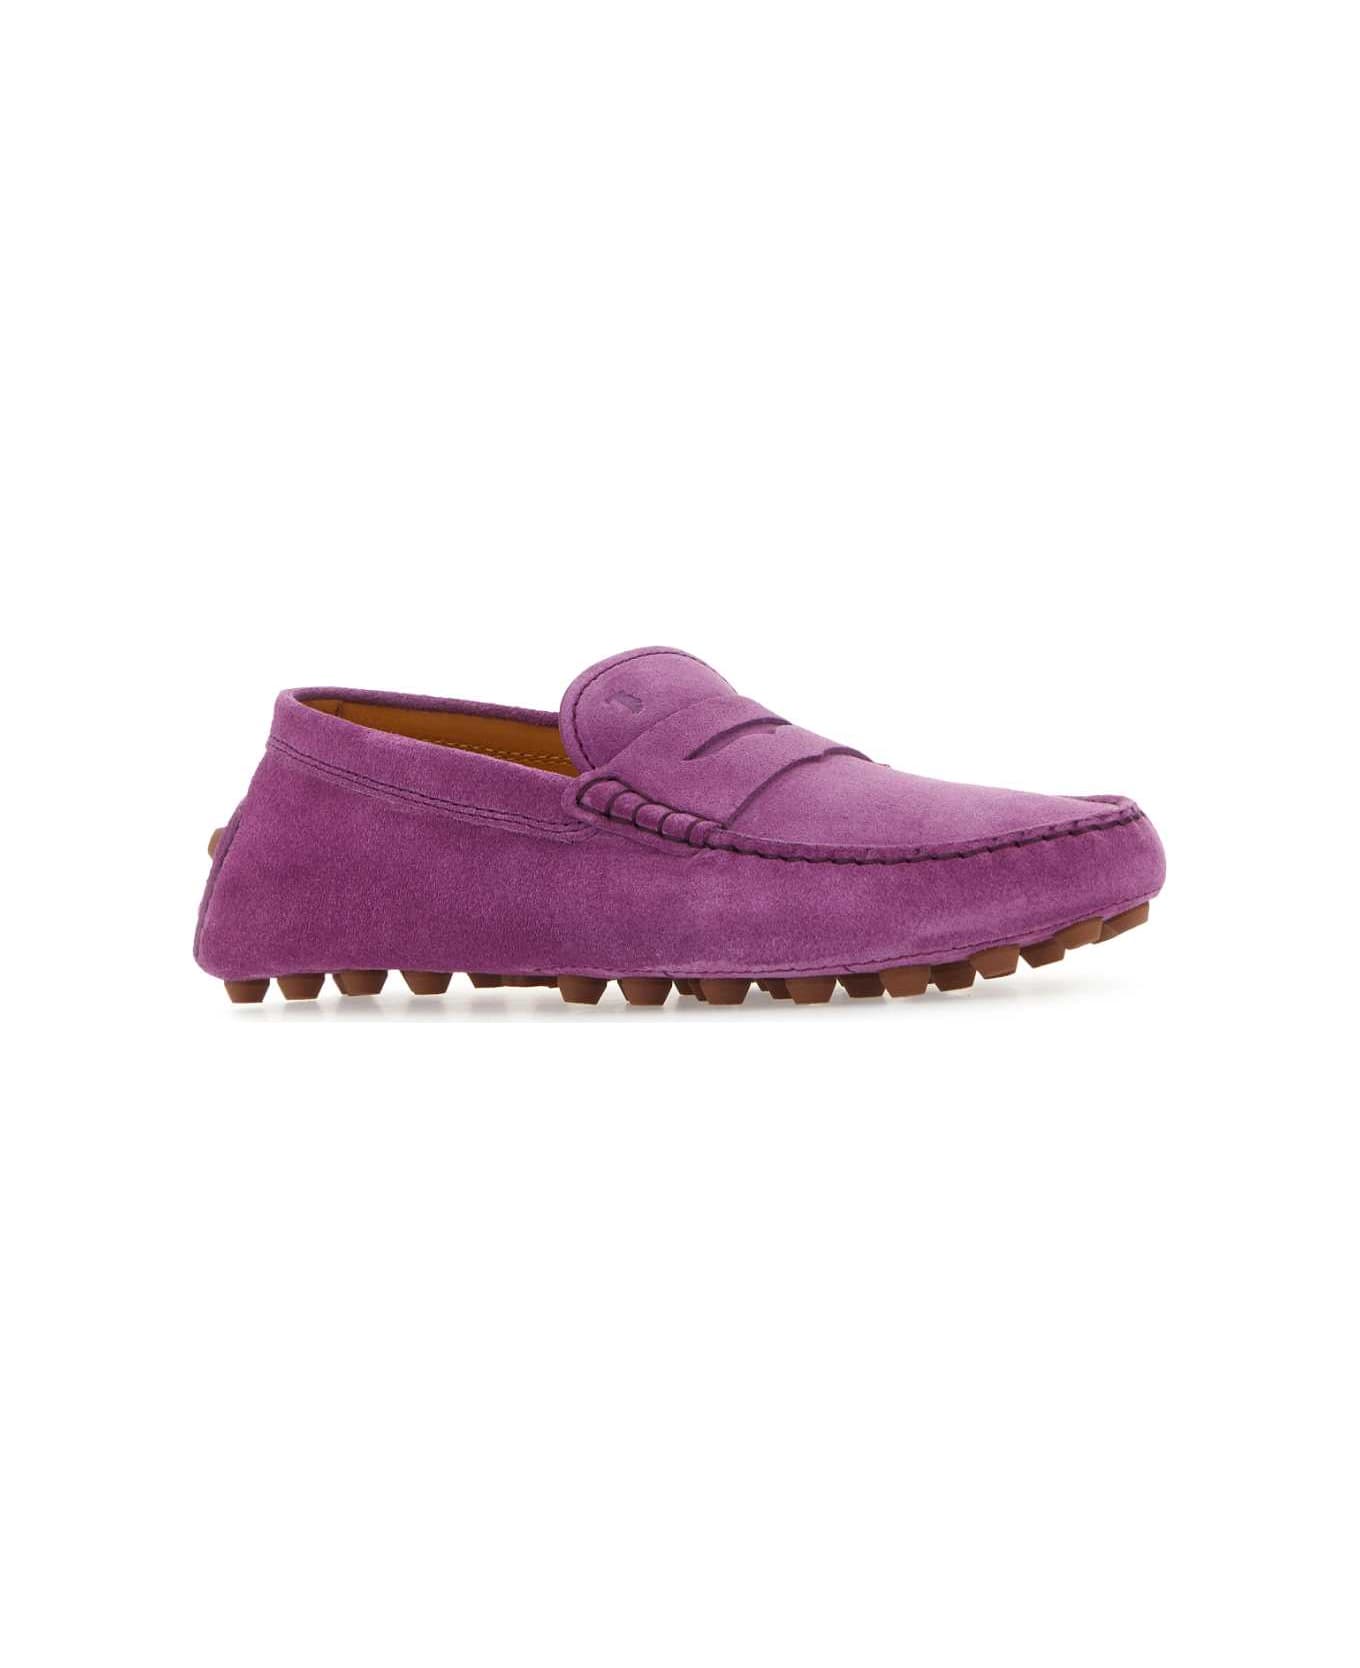 Tod's Gommino Loafers - L227 フラットシューズ